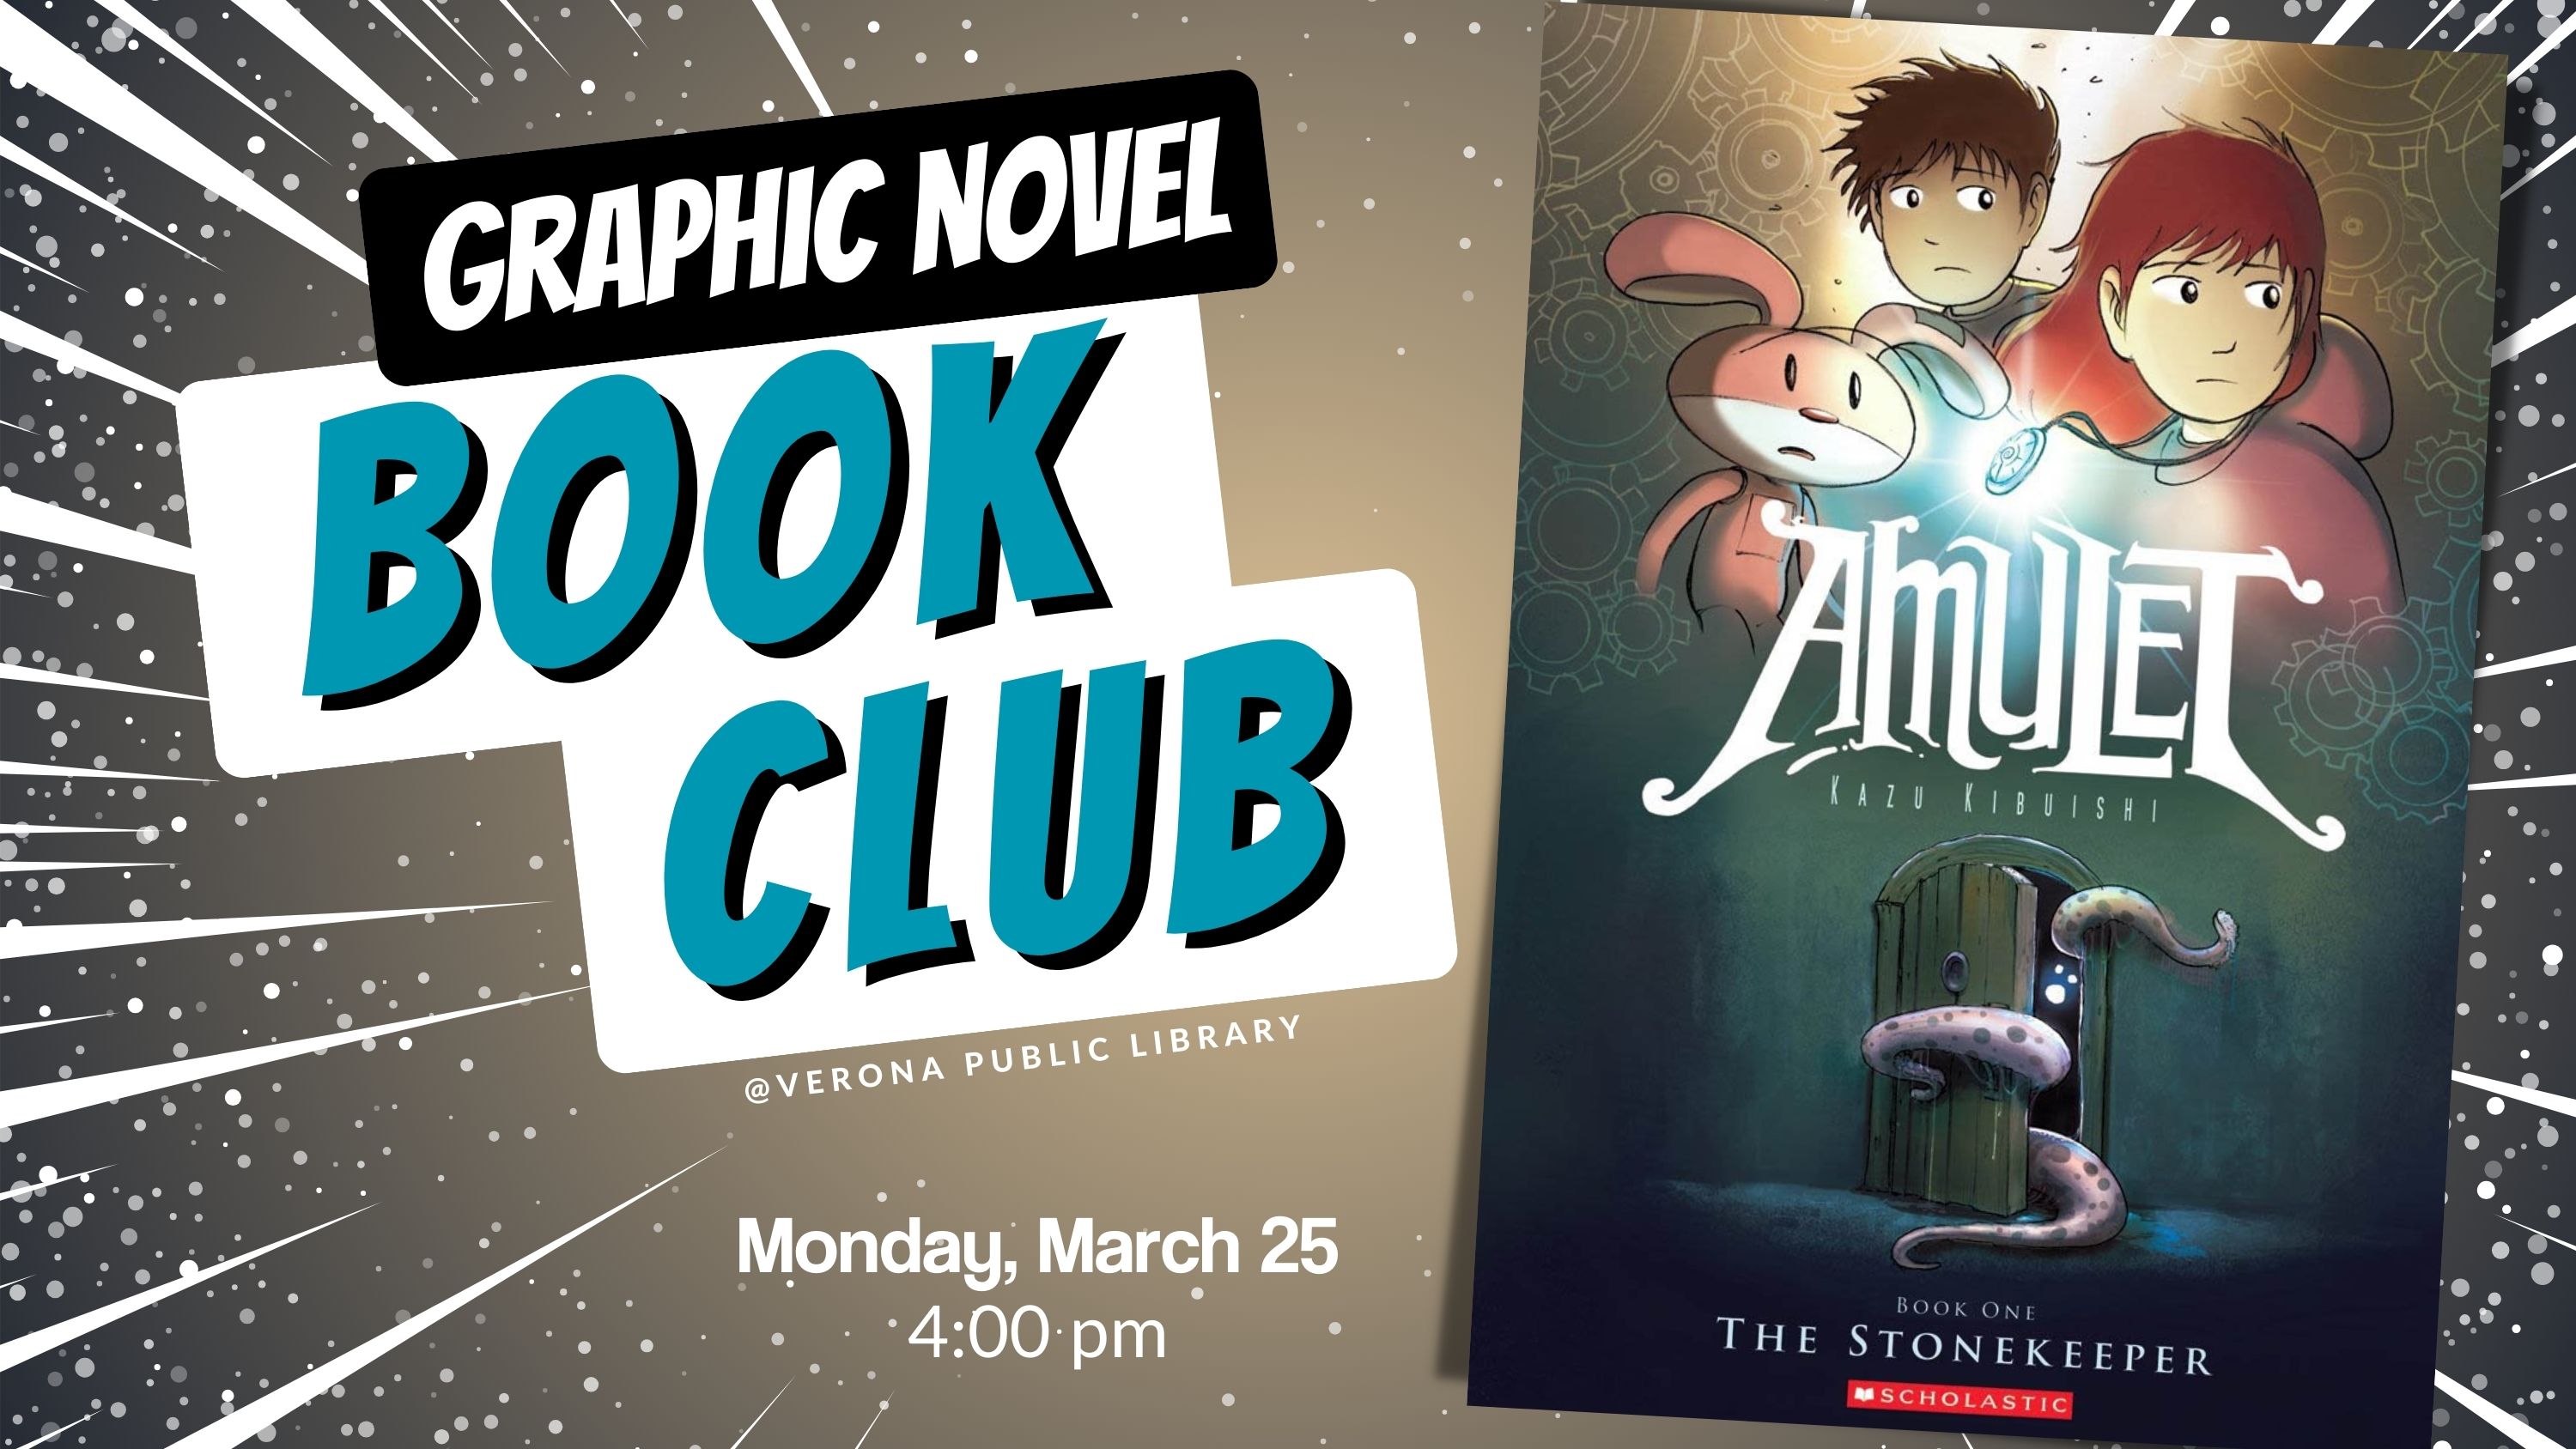 Graphic Novel Book Club; Monday, March 25 at 4:00 pm